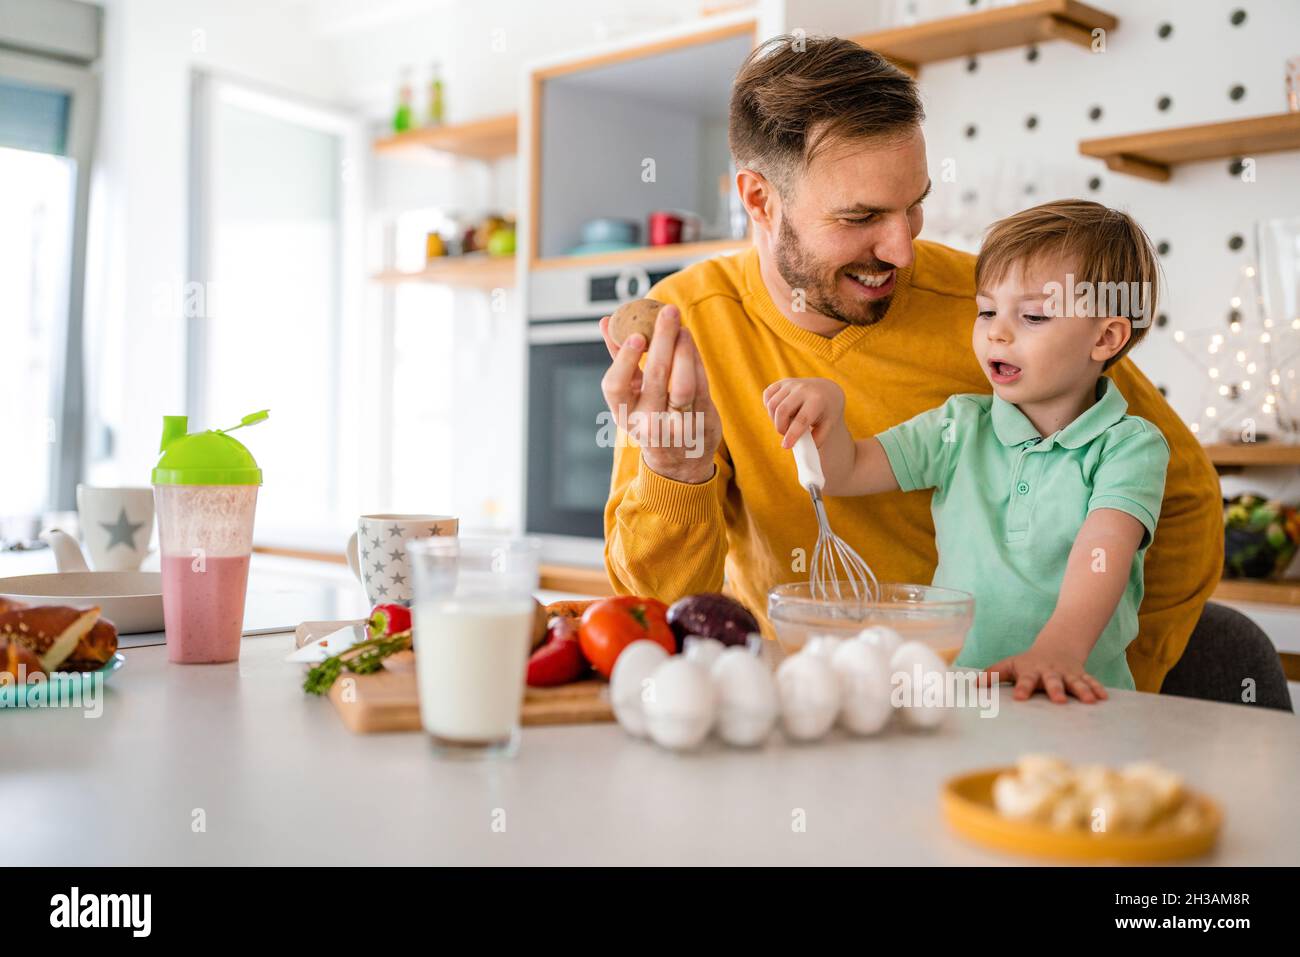 Smiling father with kids preparing healthy food and spending time together Stock Photo